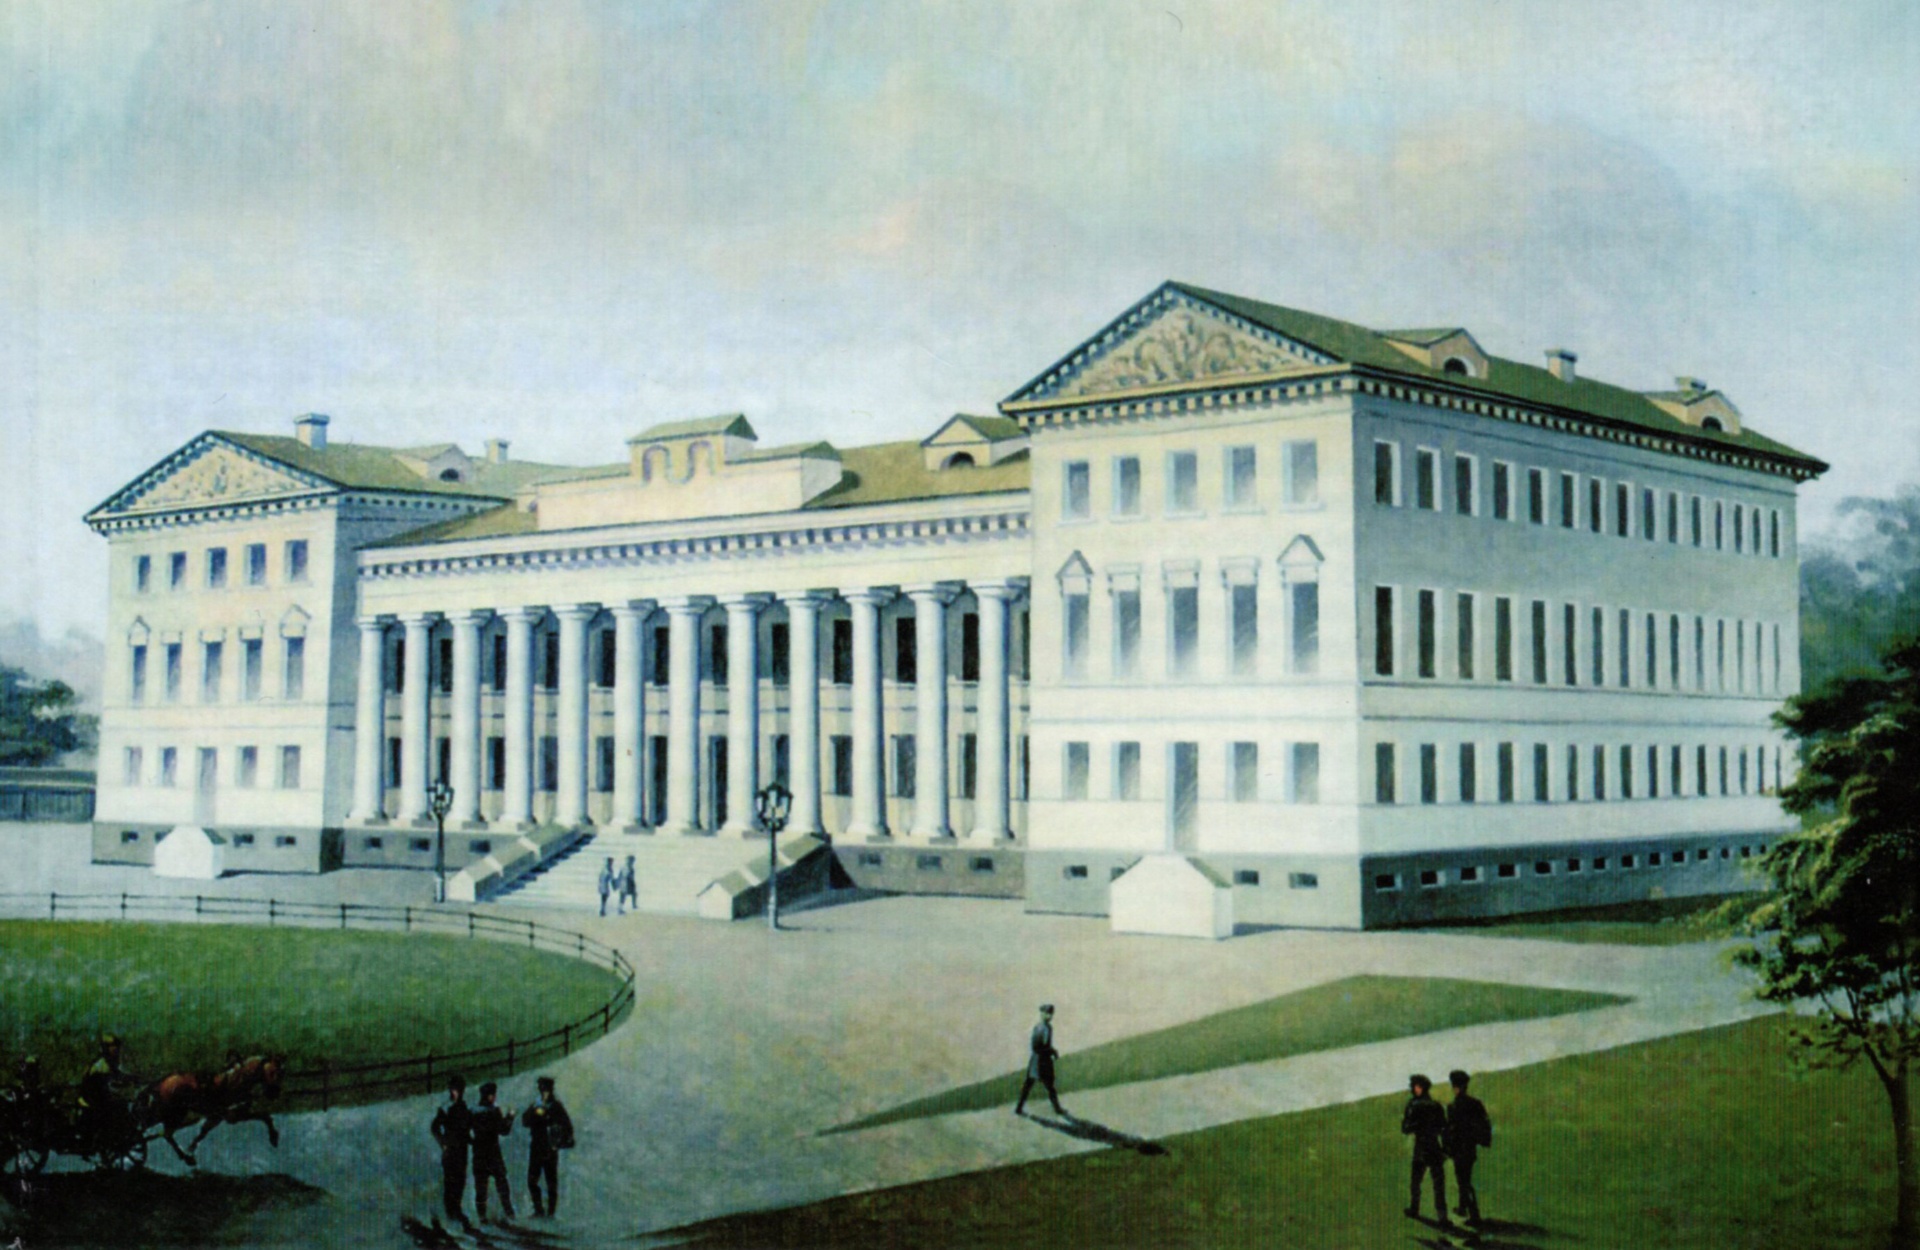 Prince Bezborodko Gymnasium of Higher Sciences at the time when M. Gogol studied here 